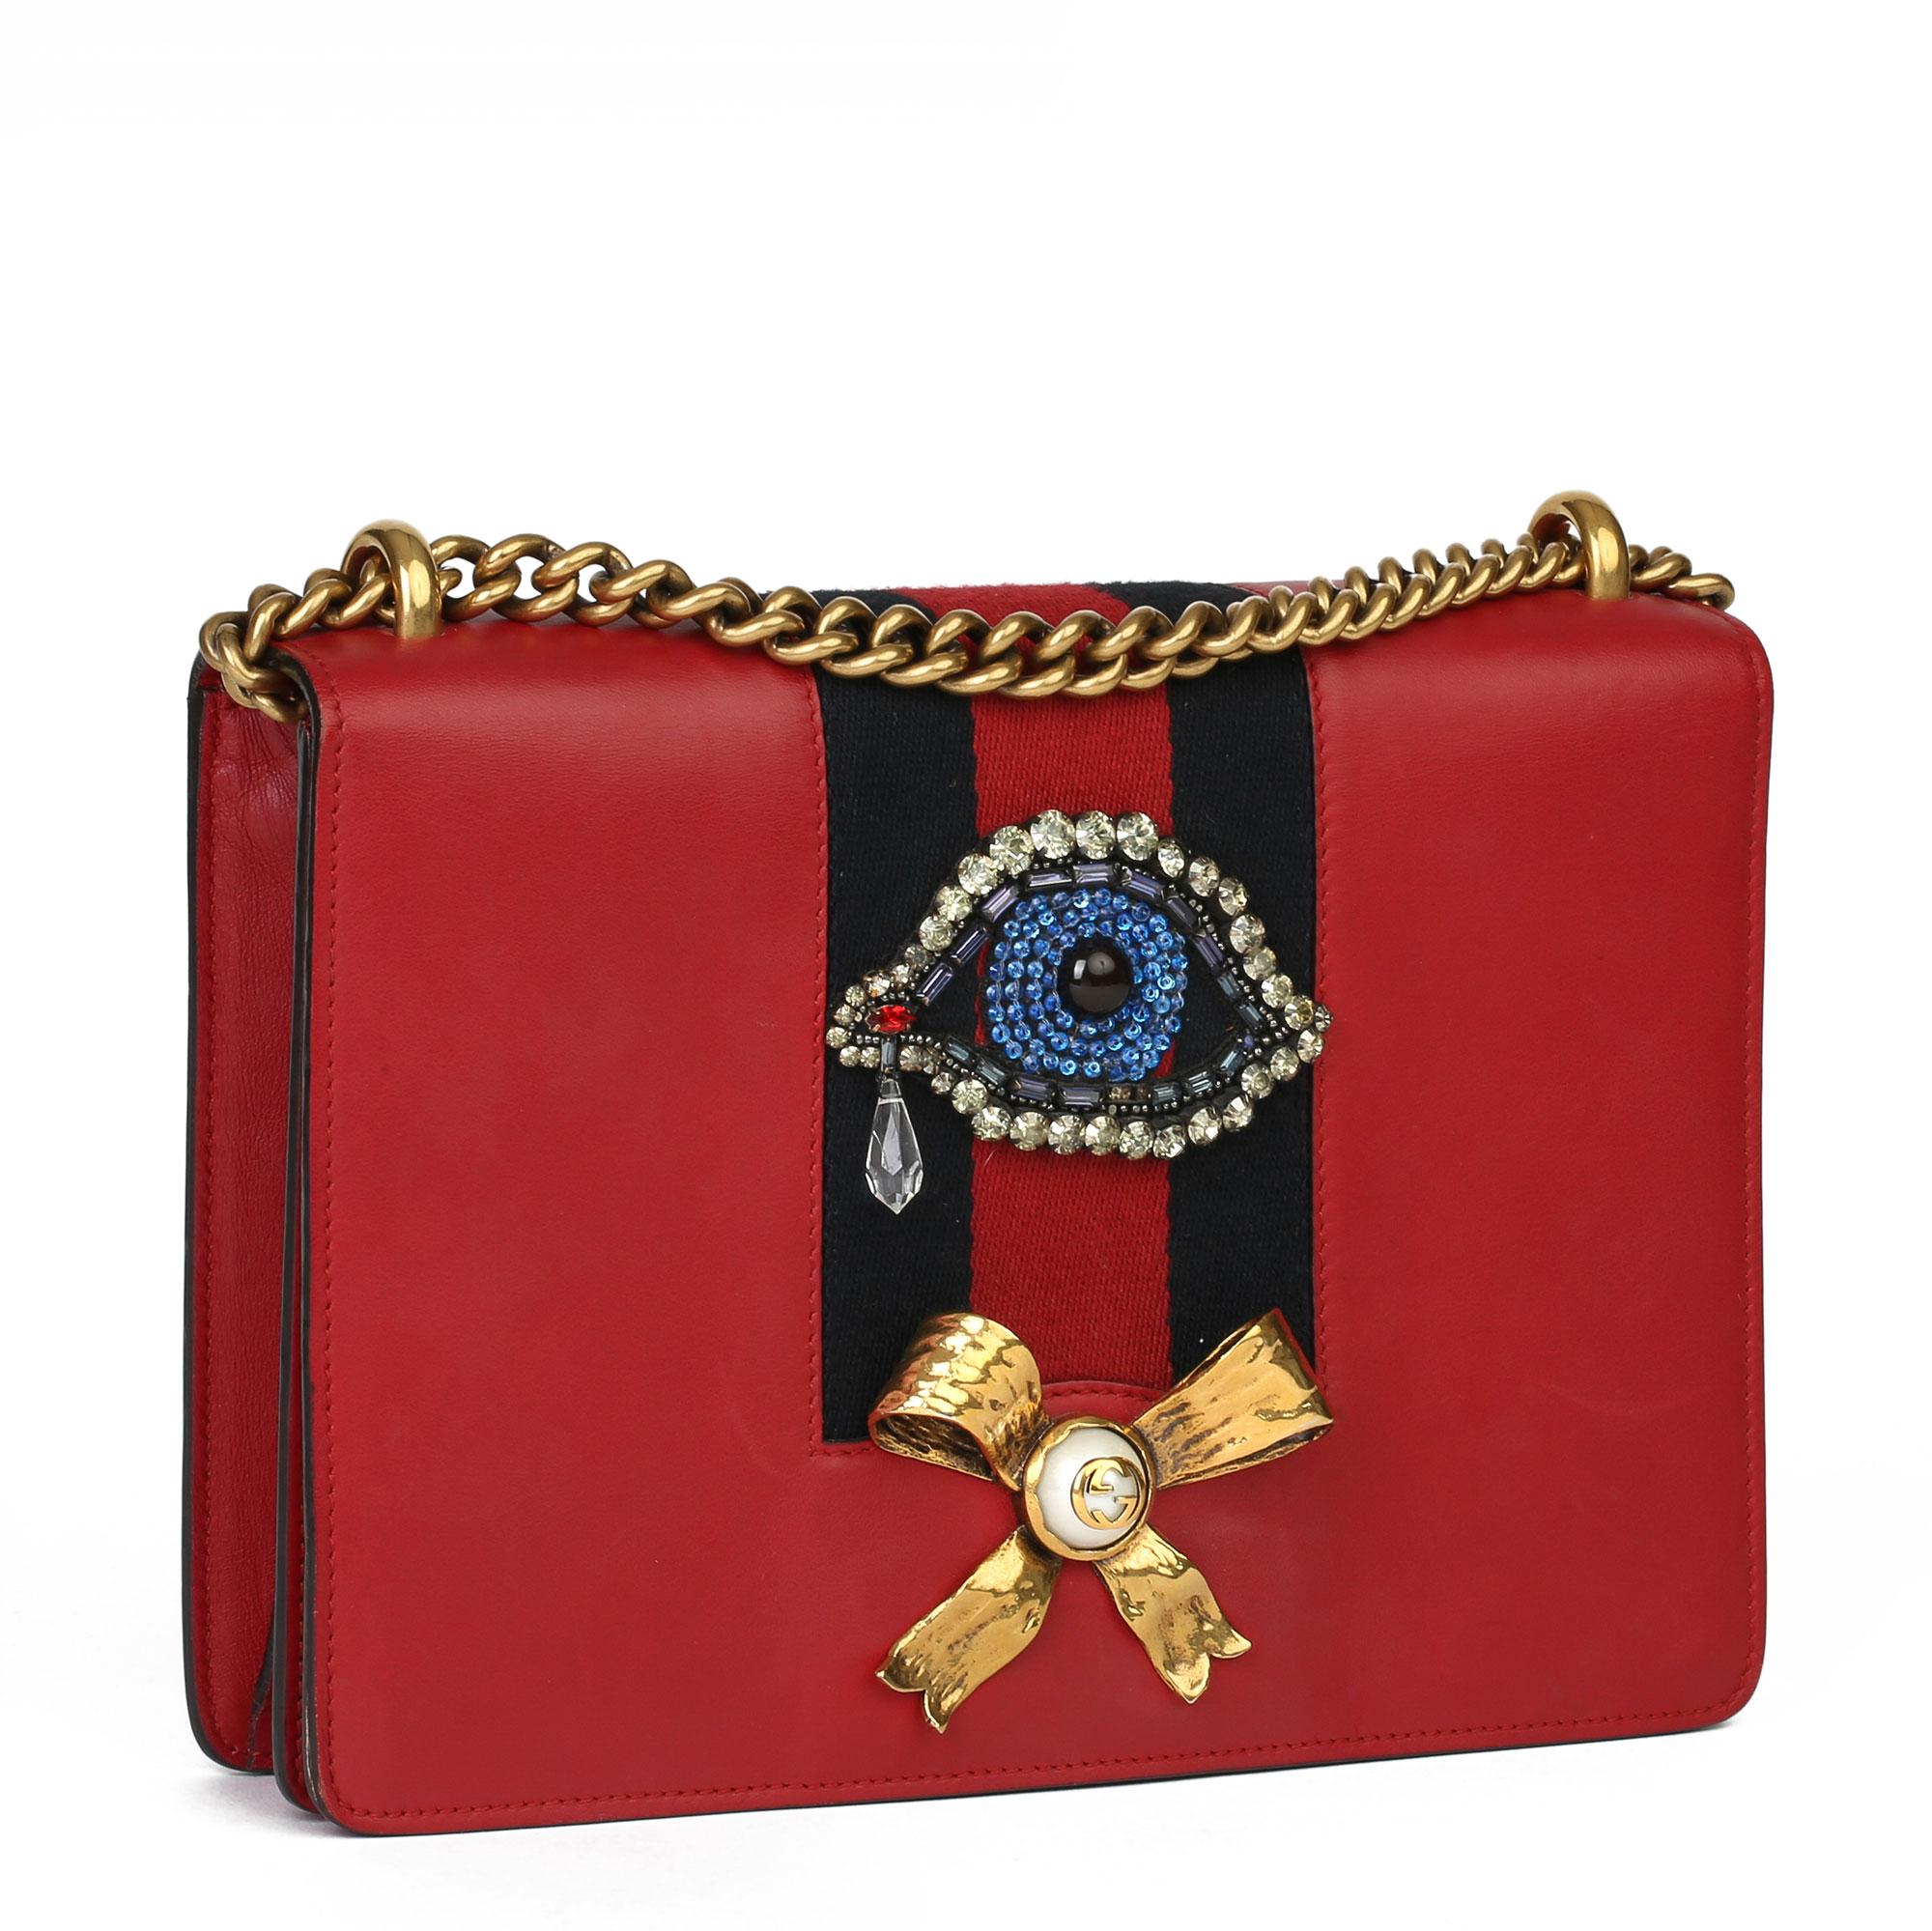 GUCCI
Red Calfskin Leather Eye Embellished Webb Medium Peony 

Xupes Reference: CB333
Serial Number: 432280 486623
Age (Circa): 2018
Accompanied By: Gucci Dust Bag
Authenticity Details: Date Stamp (Made in Italy)
Gender: Ladies
Type: Shoulder,